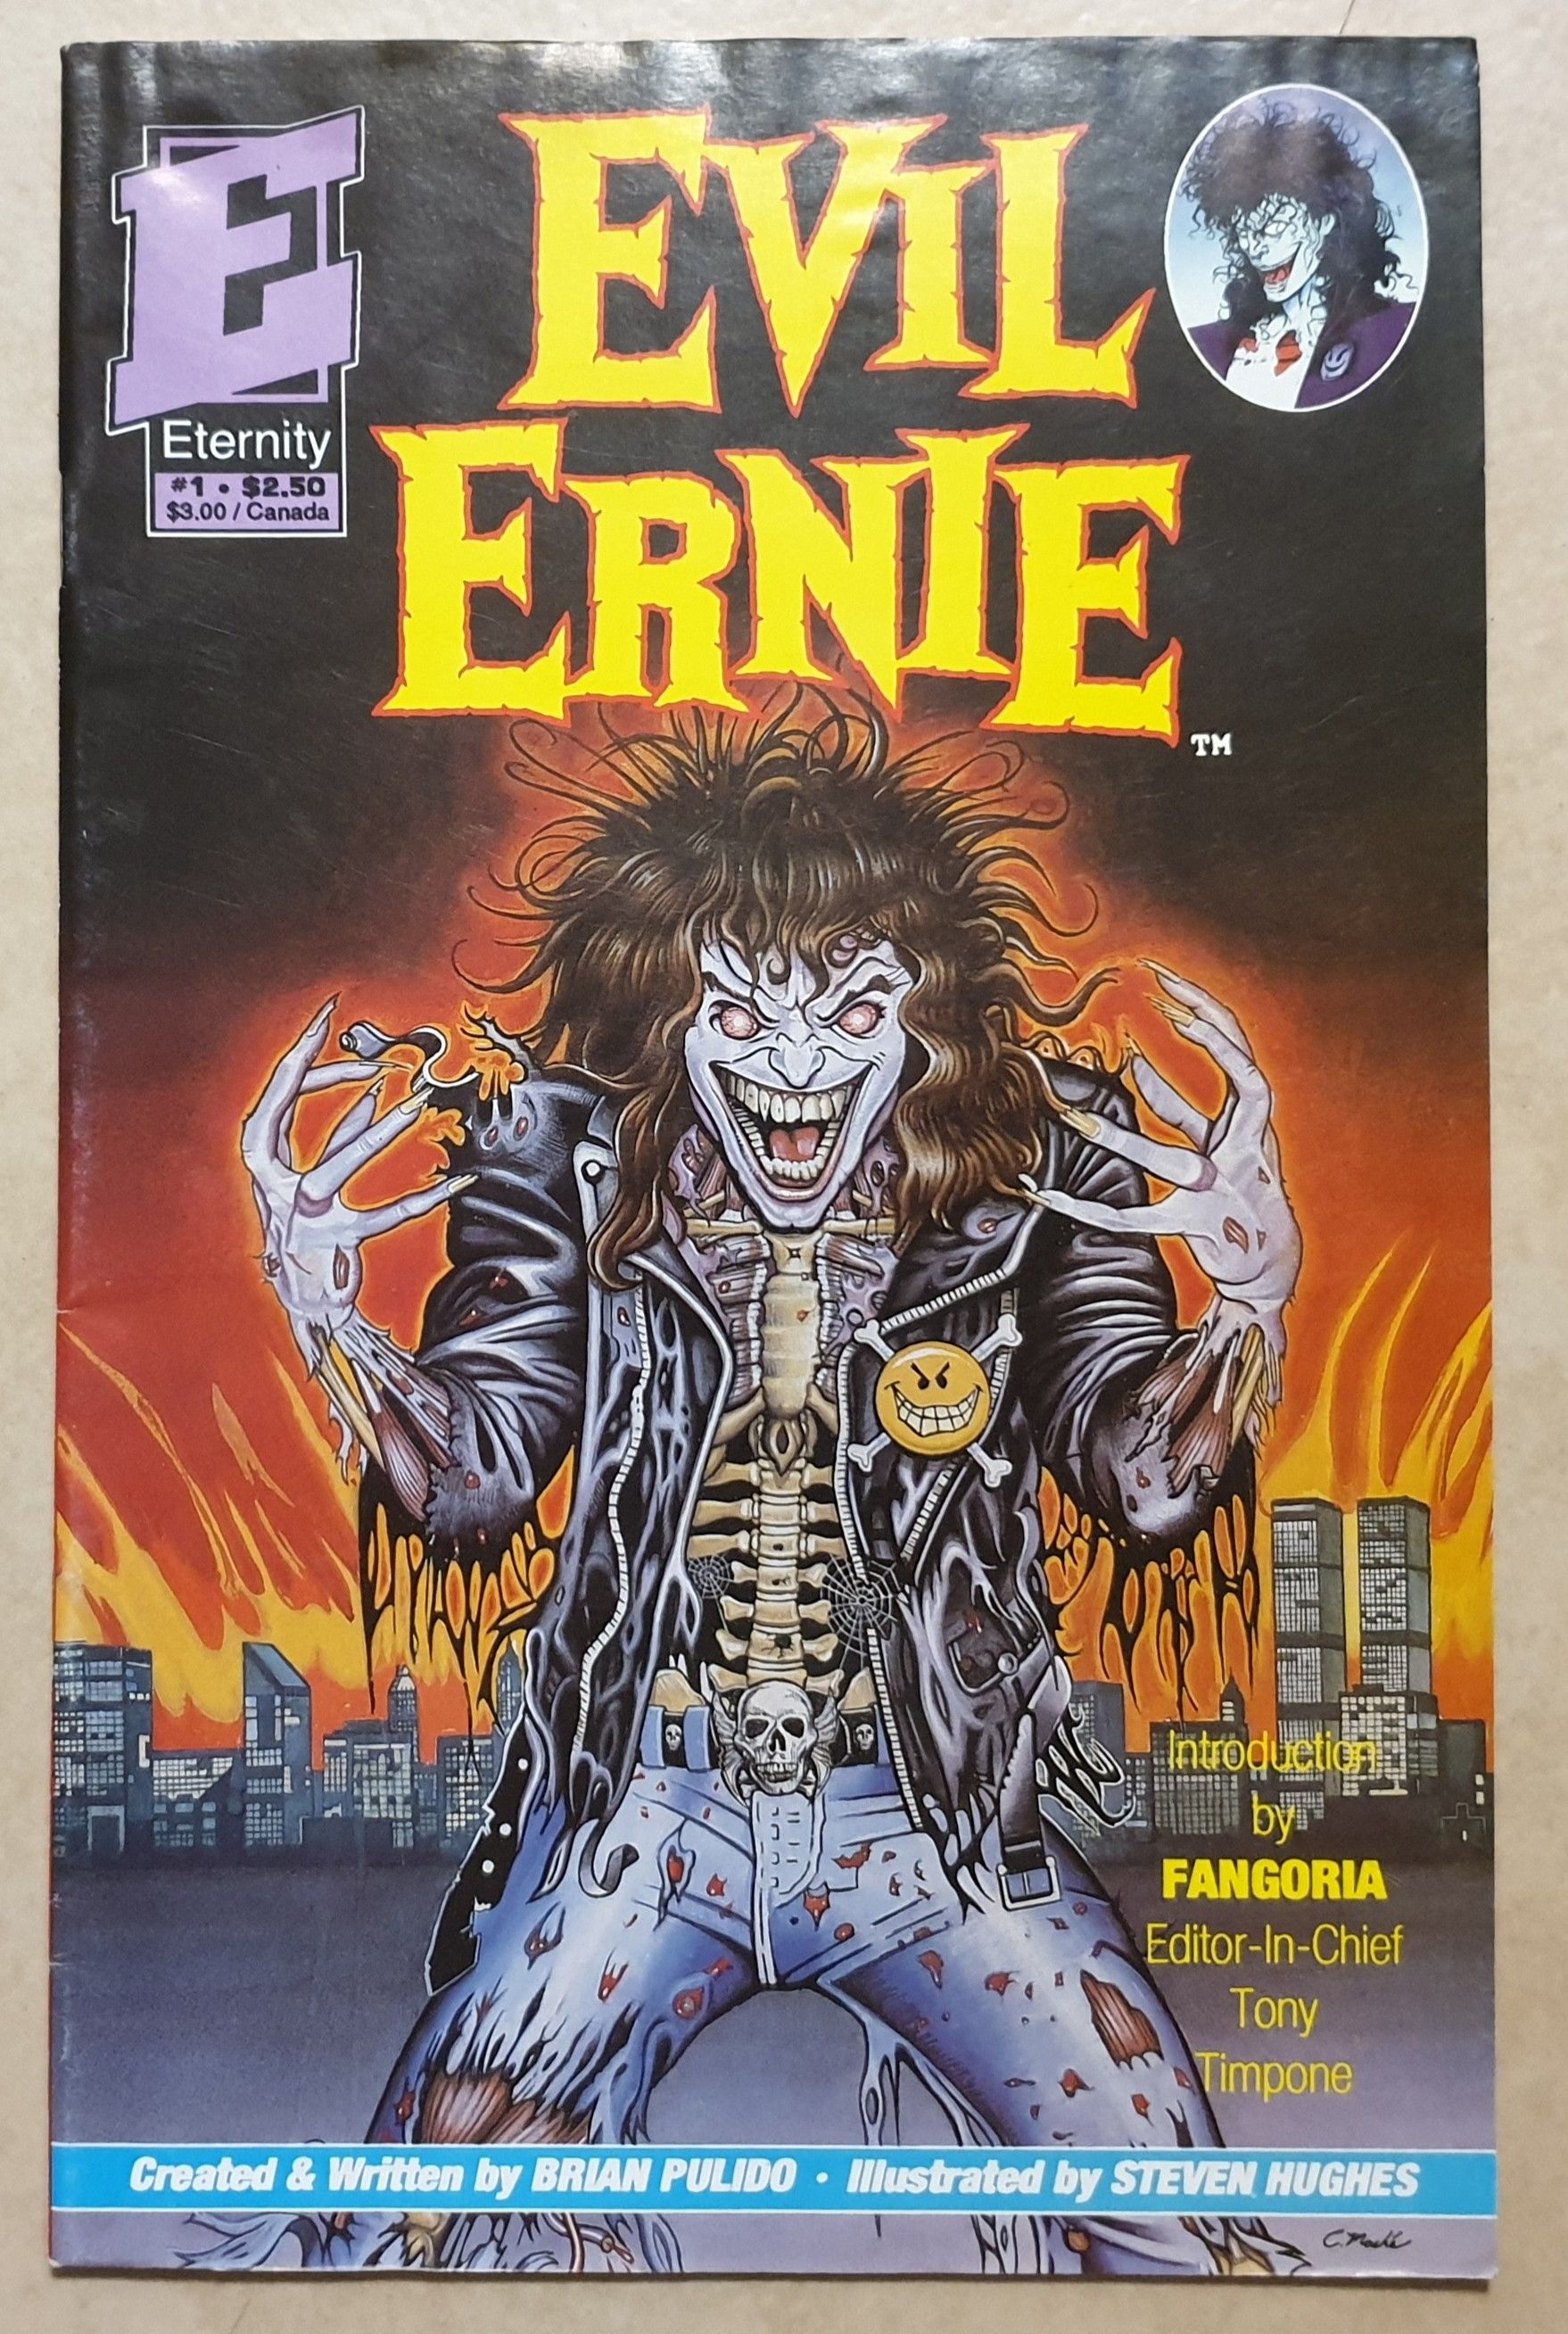 EVIL ERNIE # 1 . ETERNITY COMICS 1991. FIRST APPEARANCE: EVIL ERNIE & LADY DEATH. BAGGED & BOARDED.